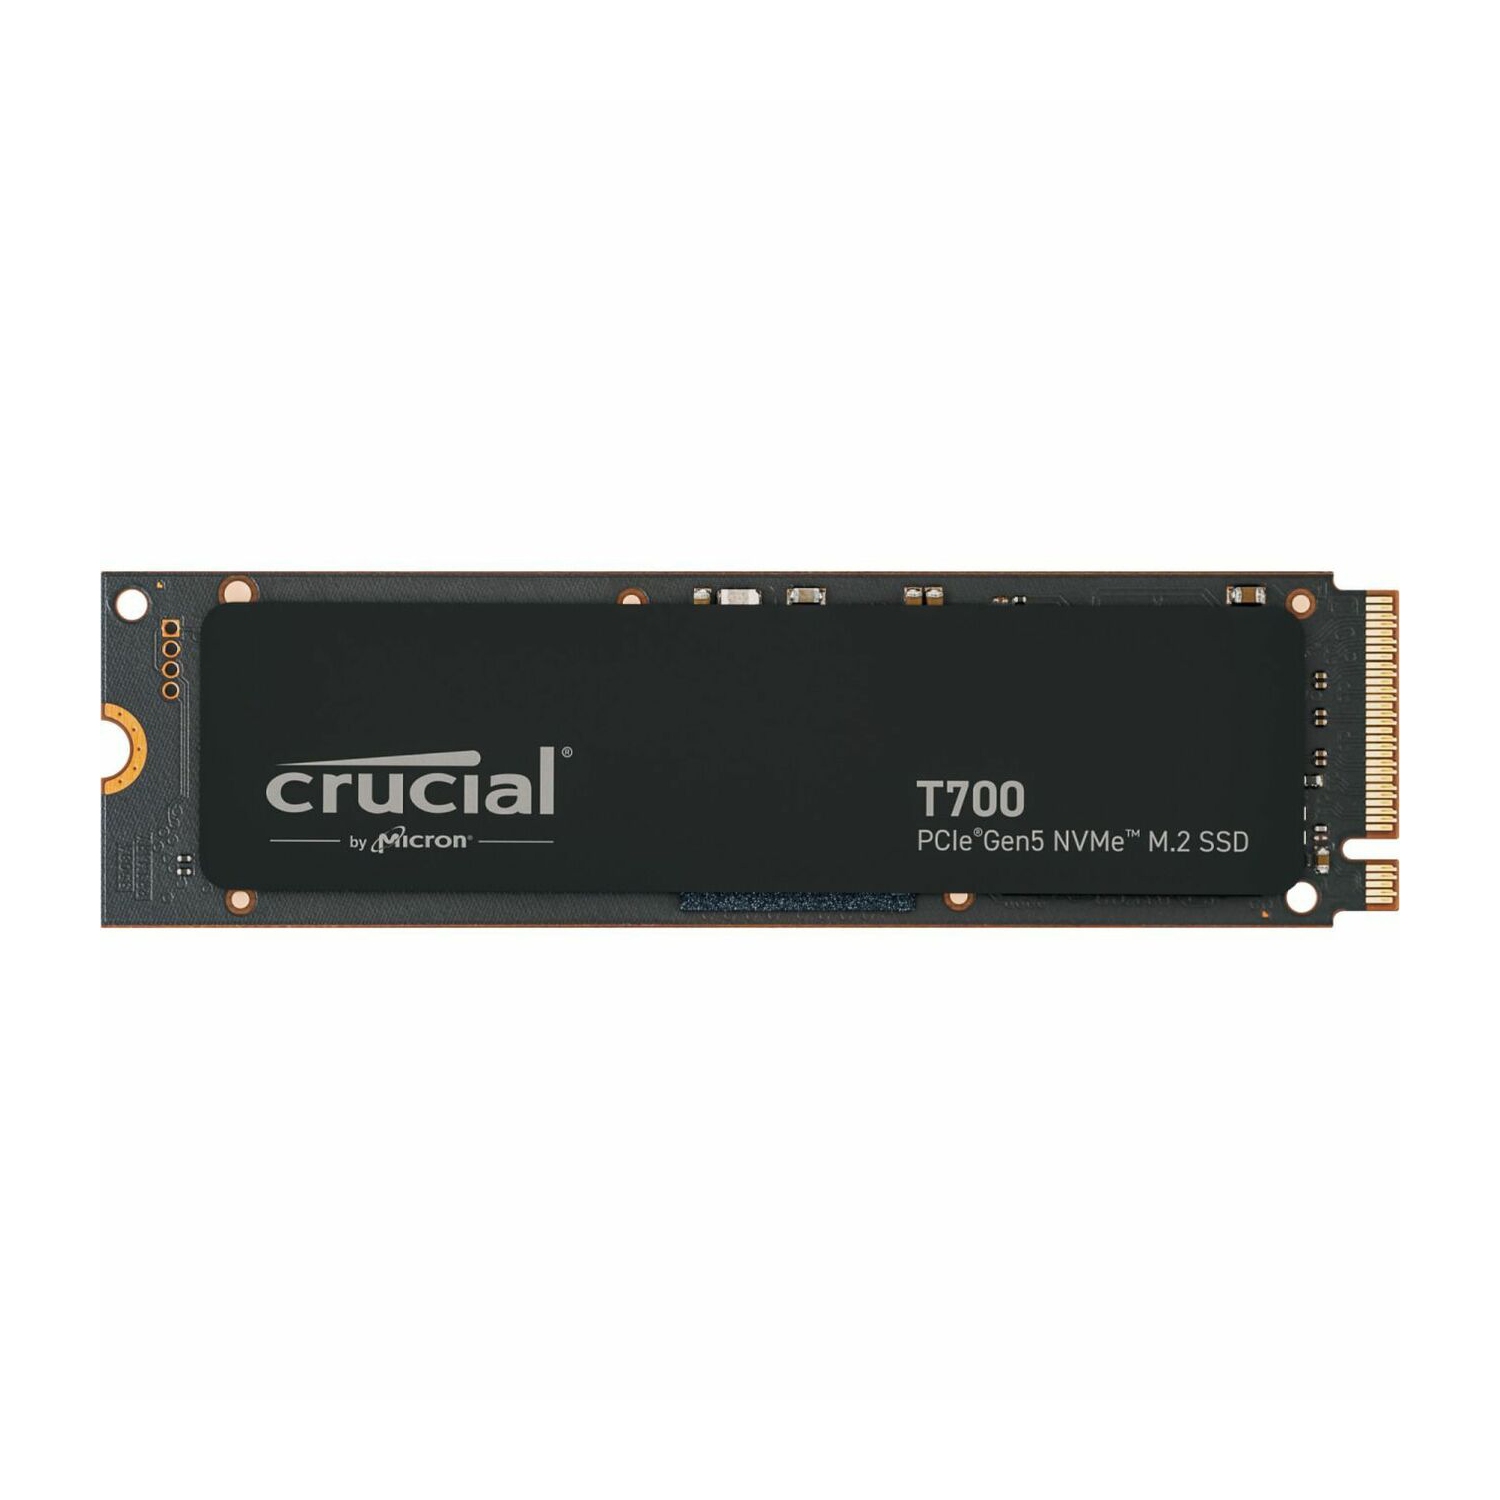 Crucial T700 2TB PCI Express NVMe 5.0 x4 Internal Solid State Drive - (CT2000T700SSD3)